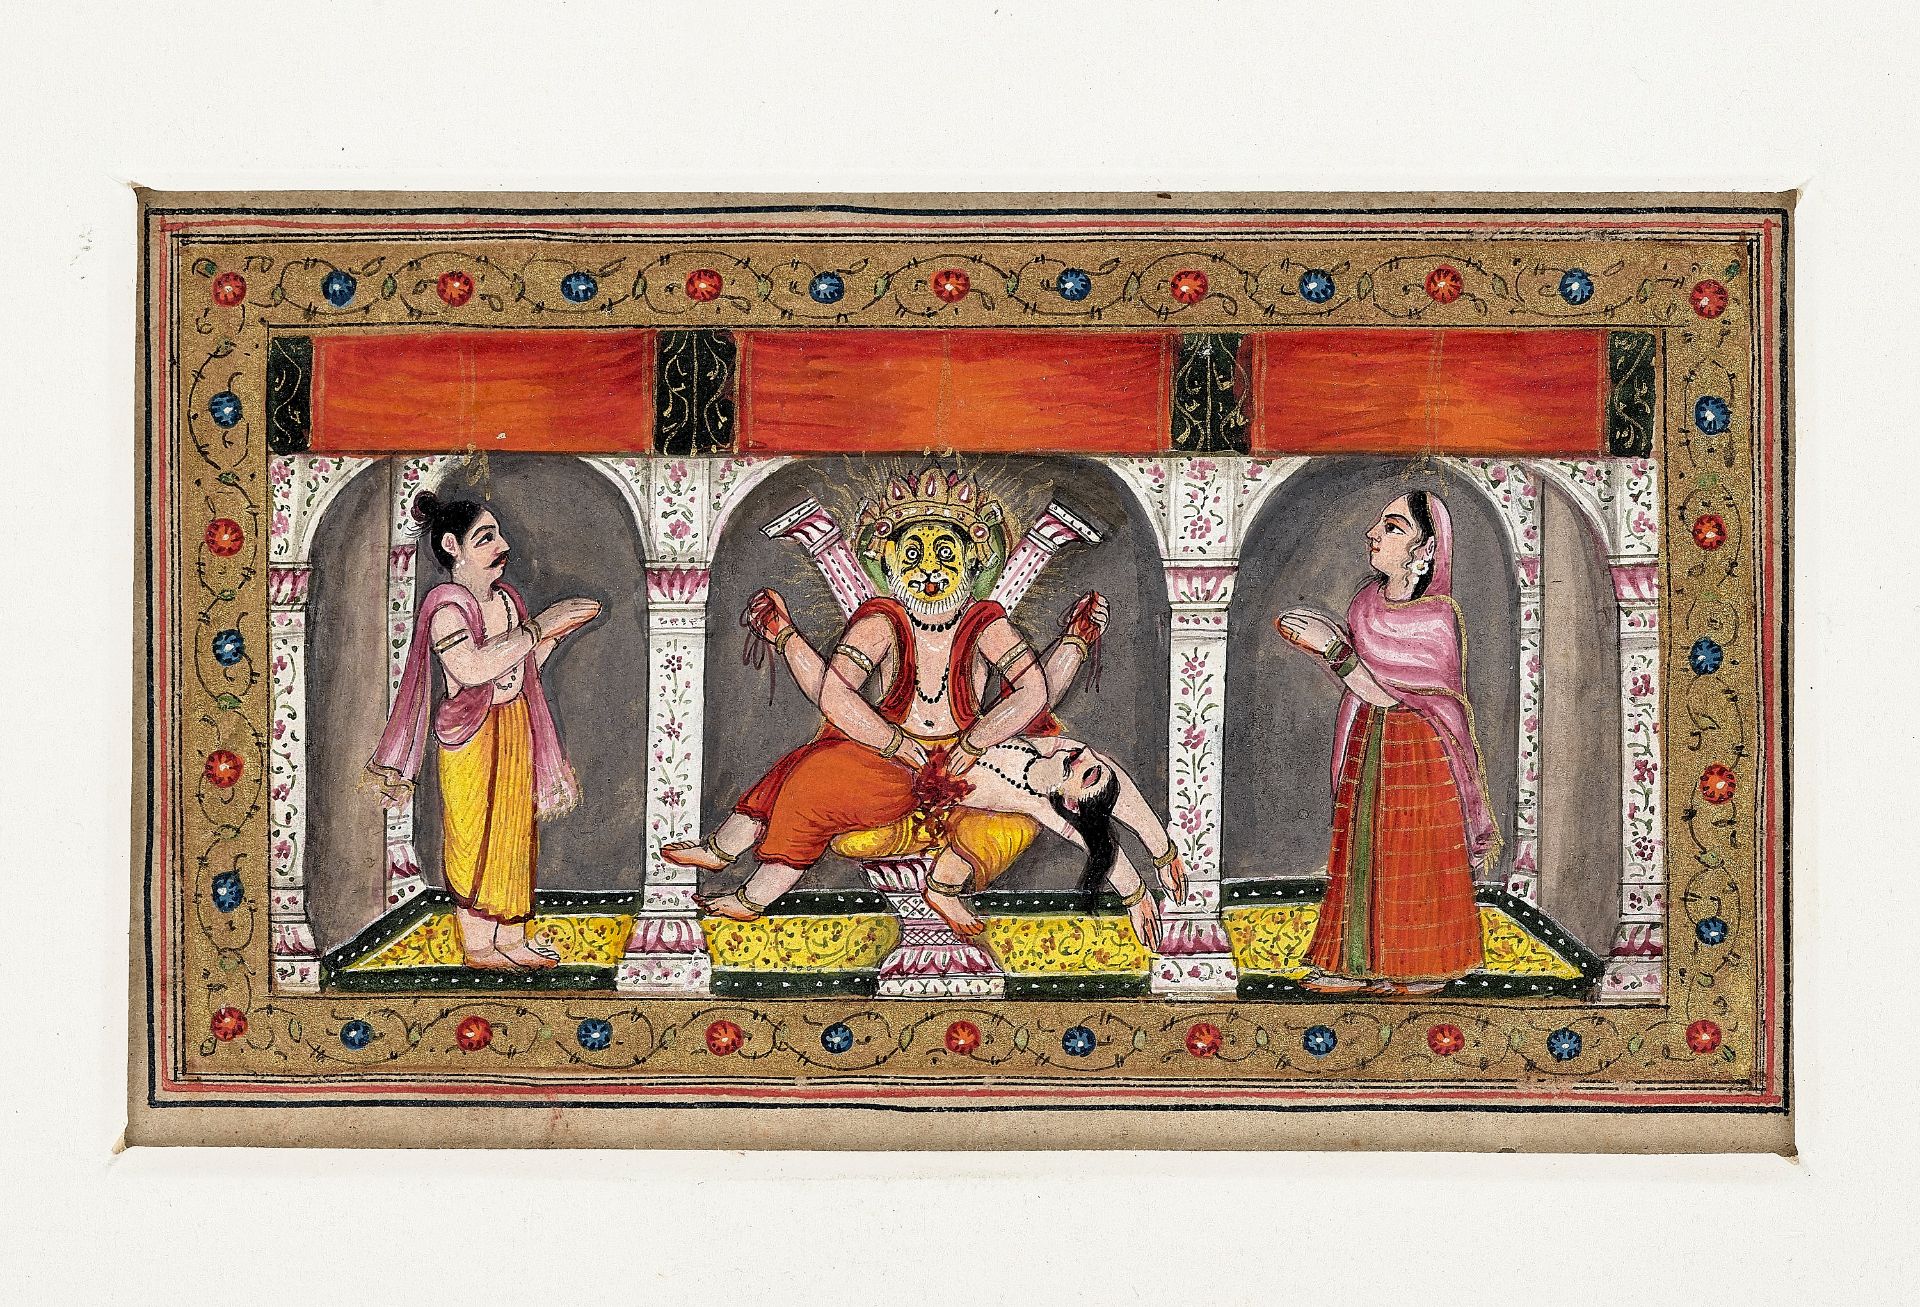 A RARE GROUP OF 27 FOLIOS FROM A MANUSCRIPT, KASHMIR 18TH CENTURY - Image 4 of 15